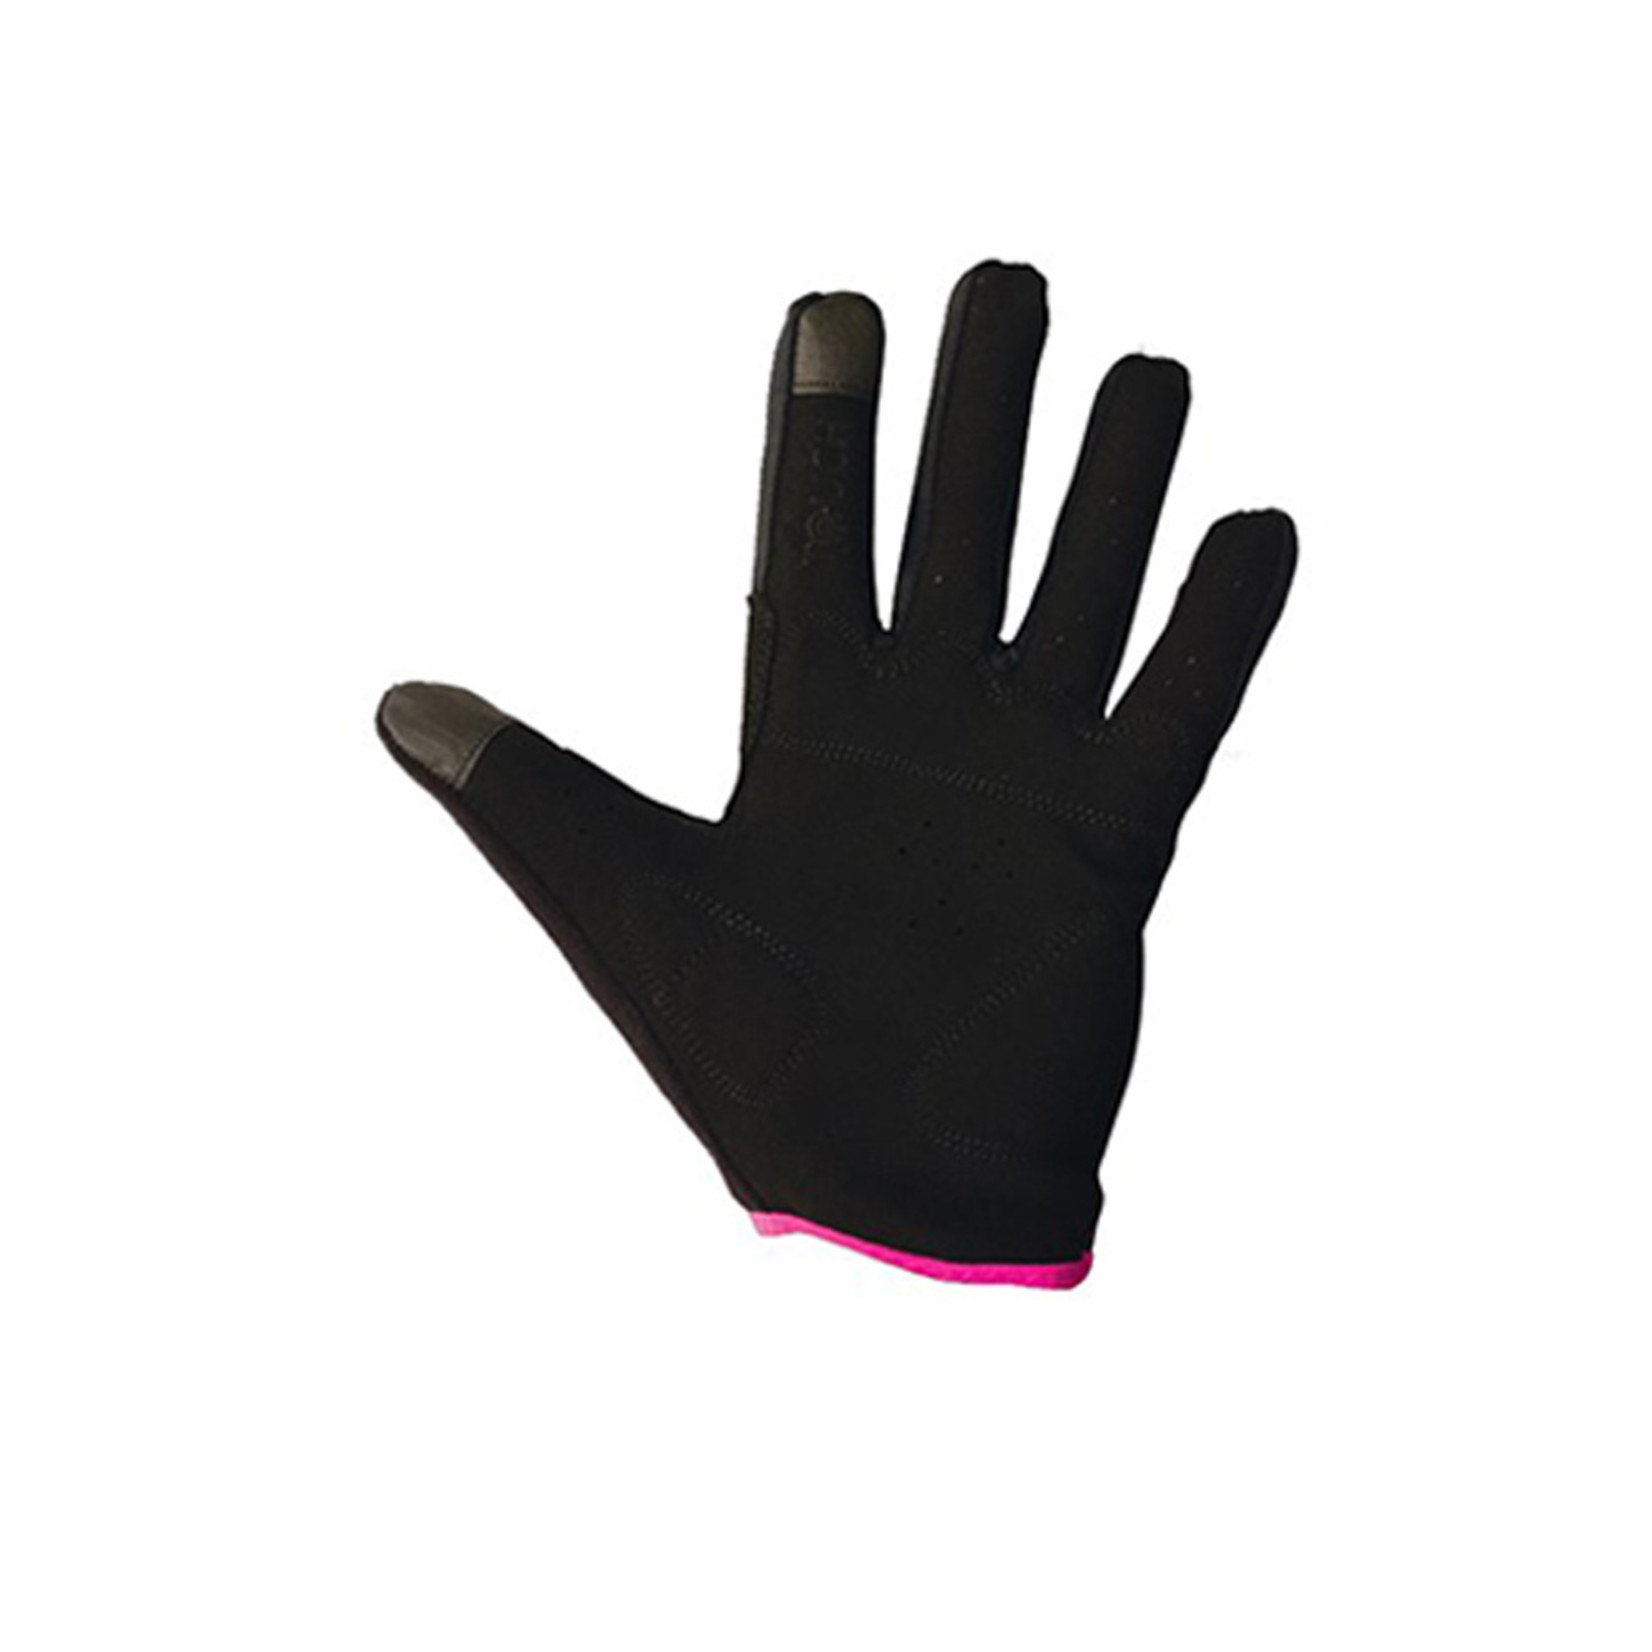 Azur Azur Bike/Cycling Lightweight Glove - L60 Series - Breathable - Pink - X-Large